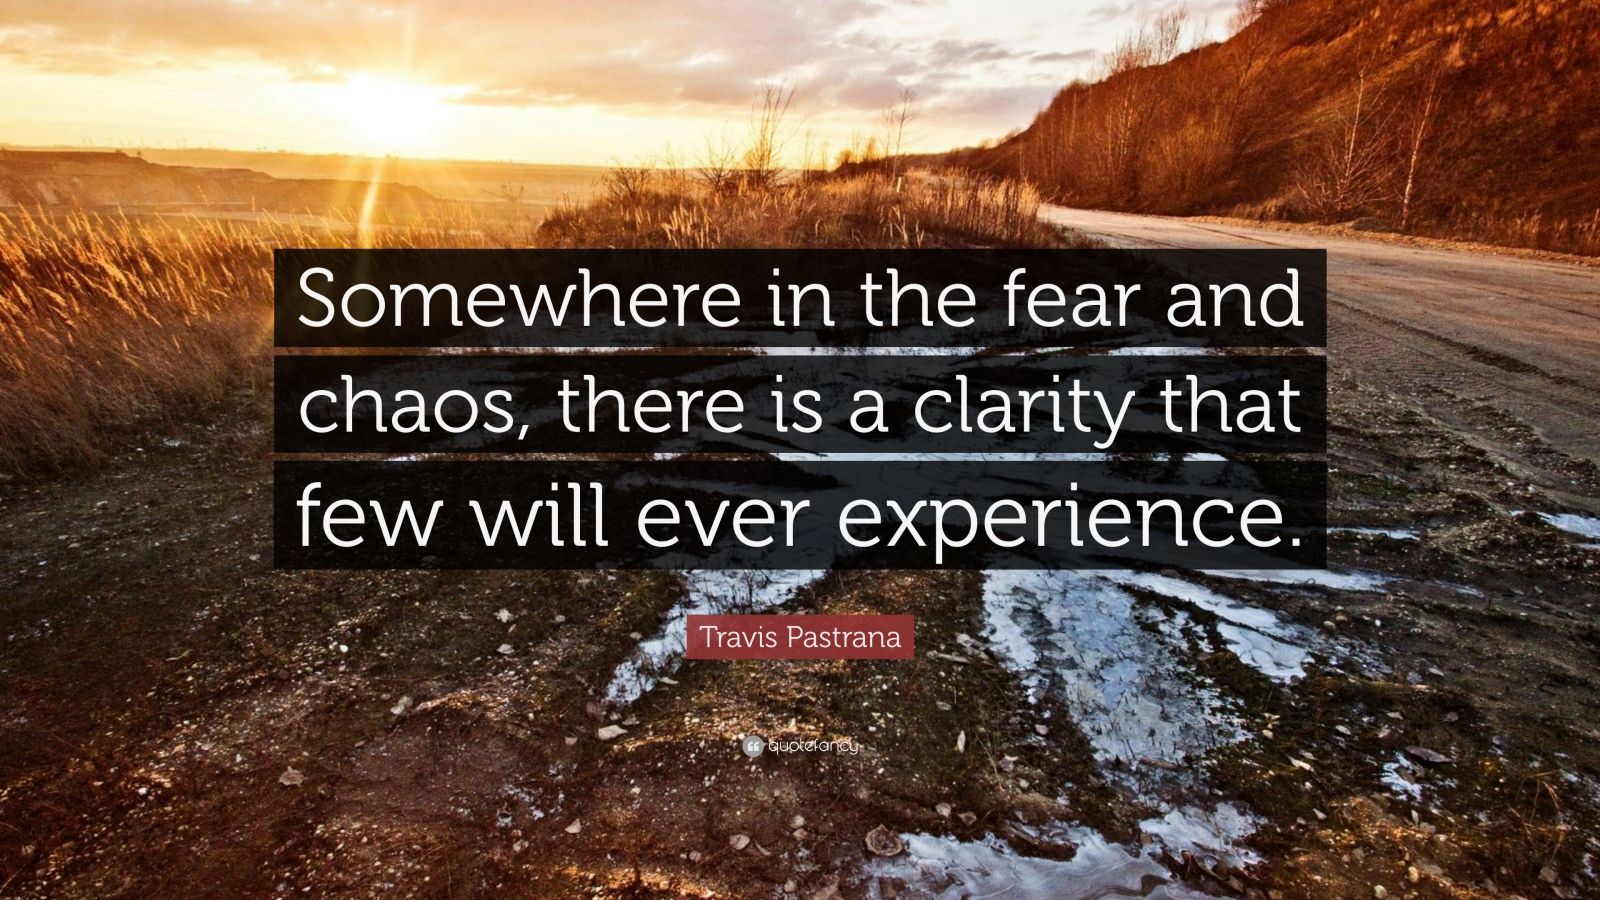 Travis Pastrana Quote: "Somewhere in the fear and chaos ...